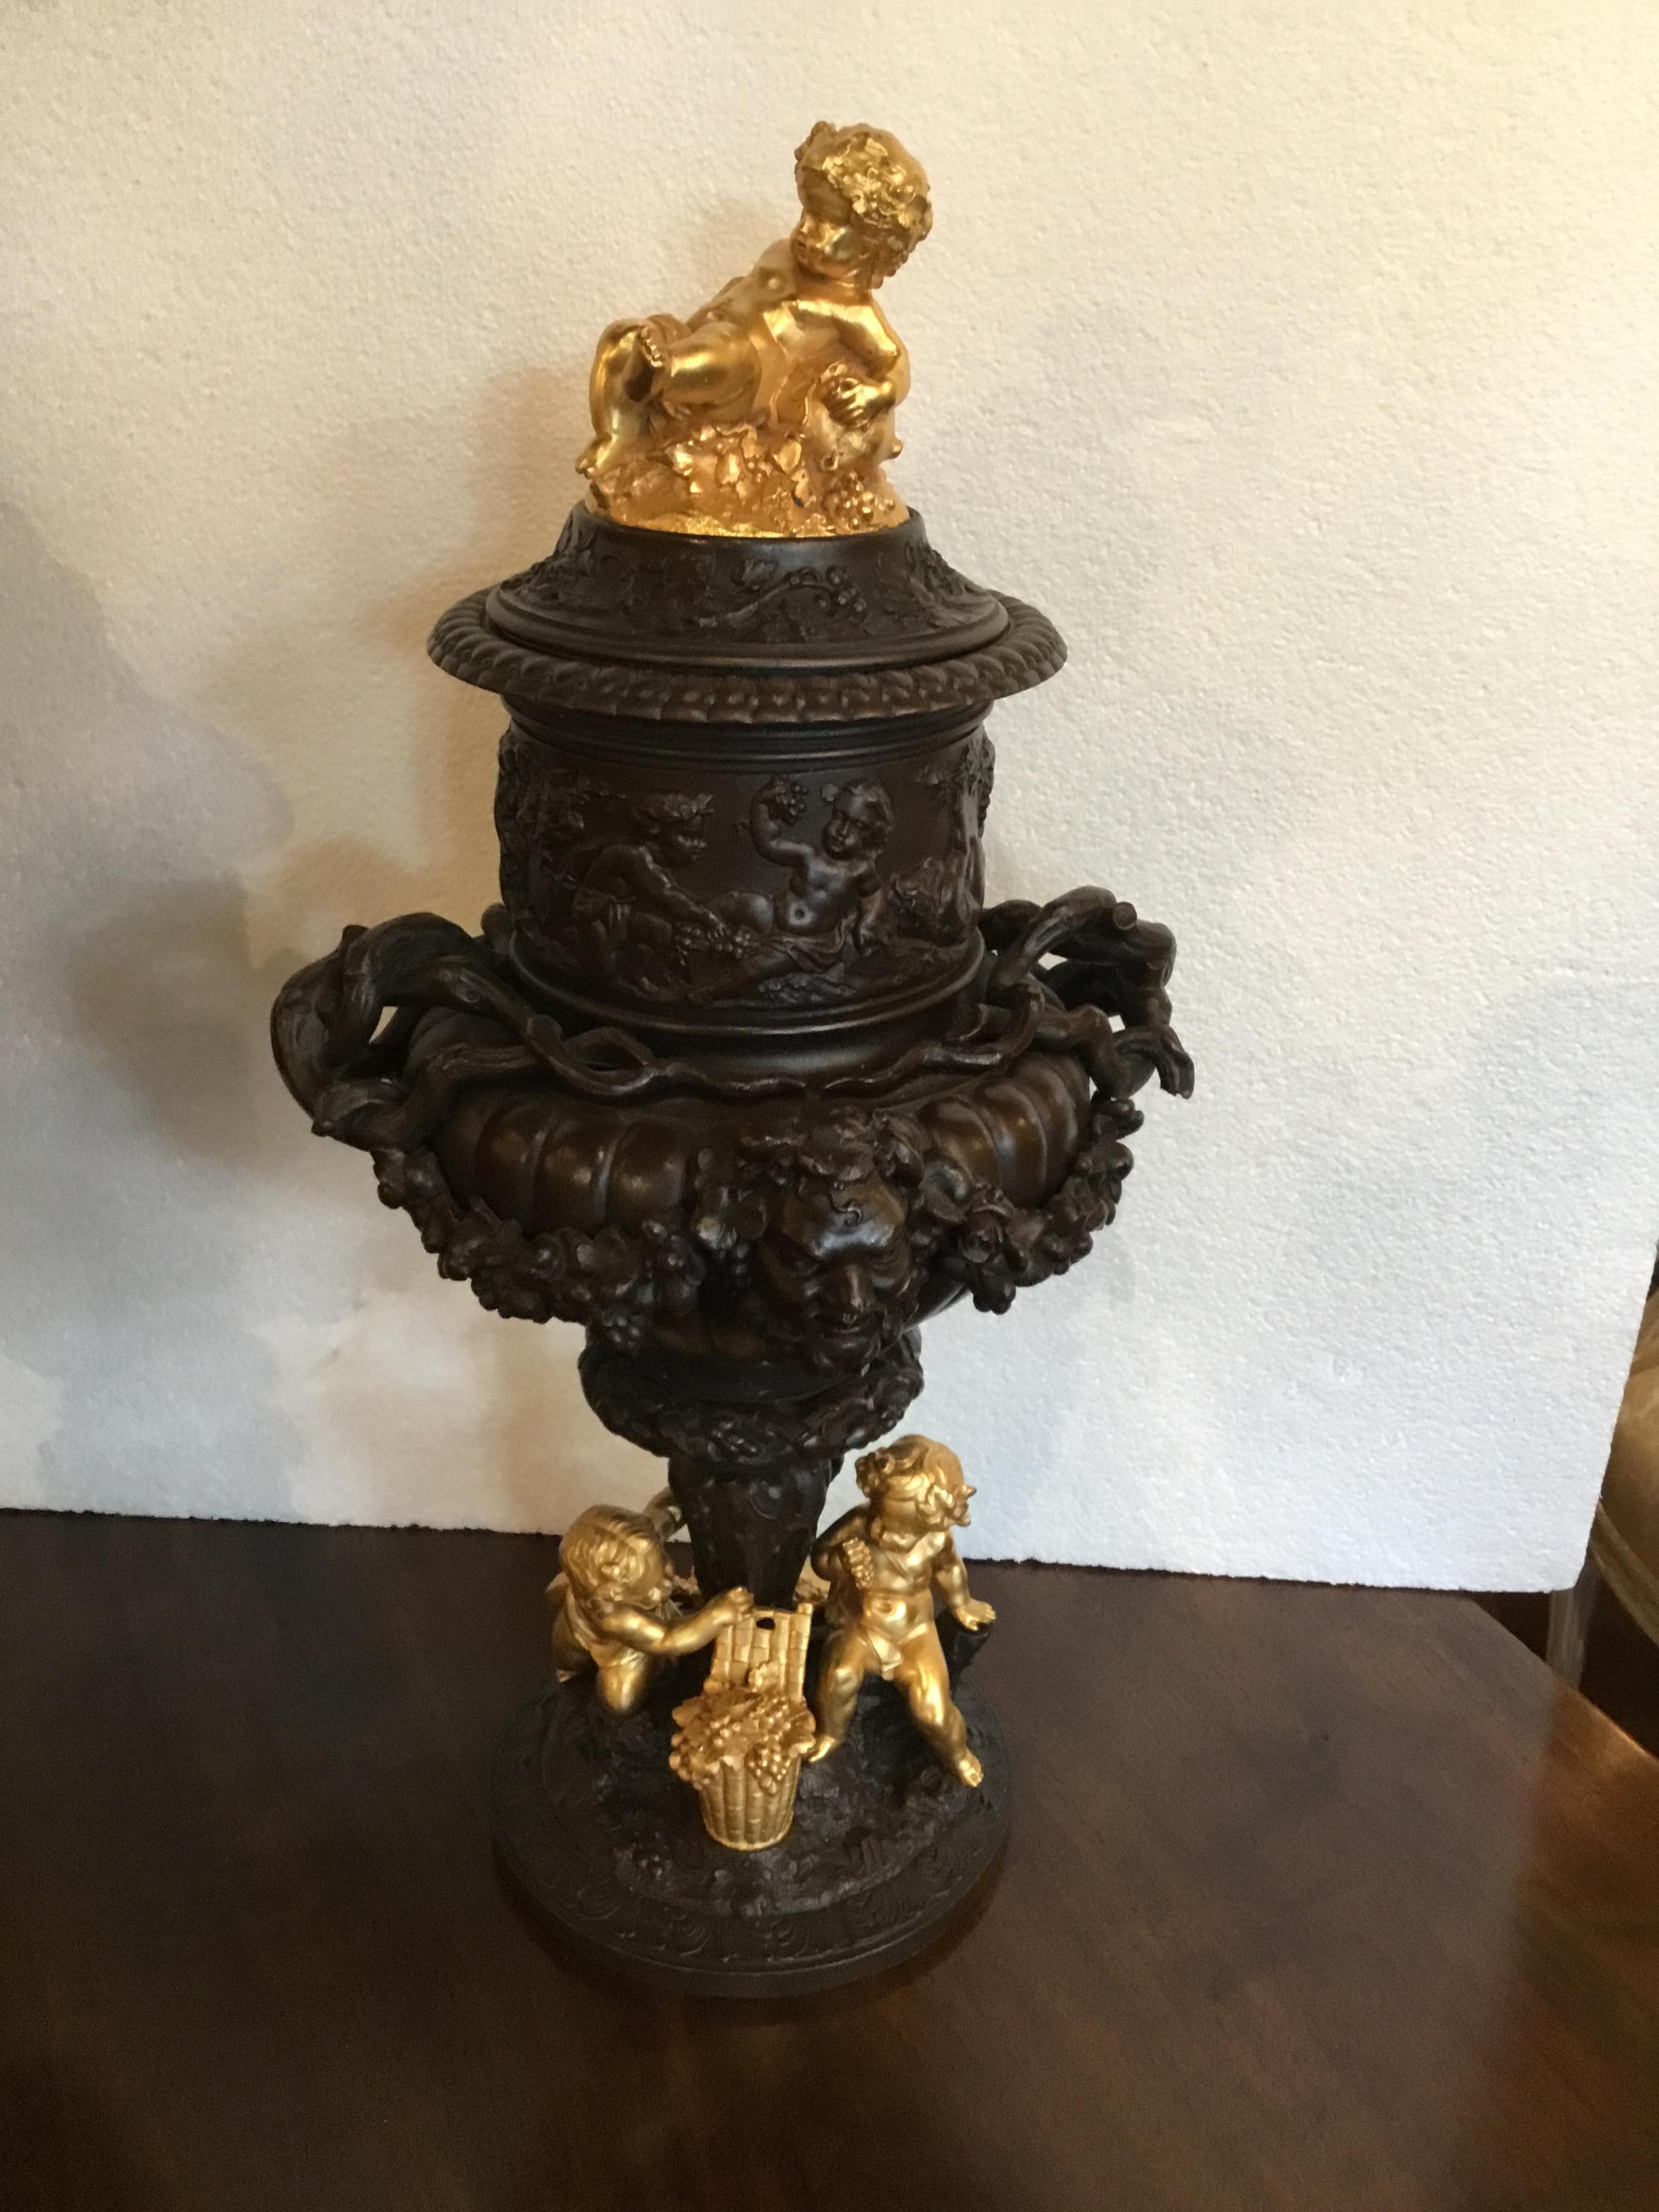 Pair of handsome bronze urns with a mask of baccantes centered on the
Front of the urns. Playful putti in gilt bronze decorate the cap and the
Bottom of these pieces. The putti are gathering grapes for their basket.
Floral and foliate designs